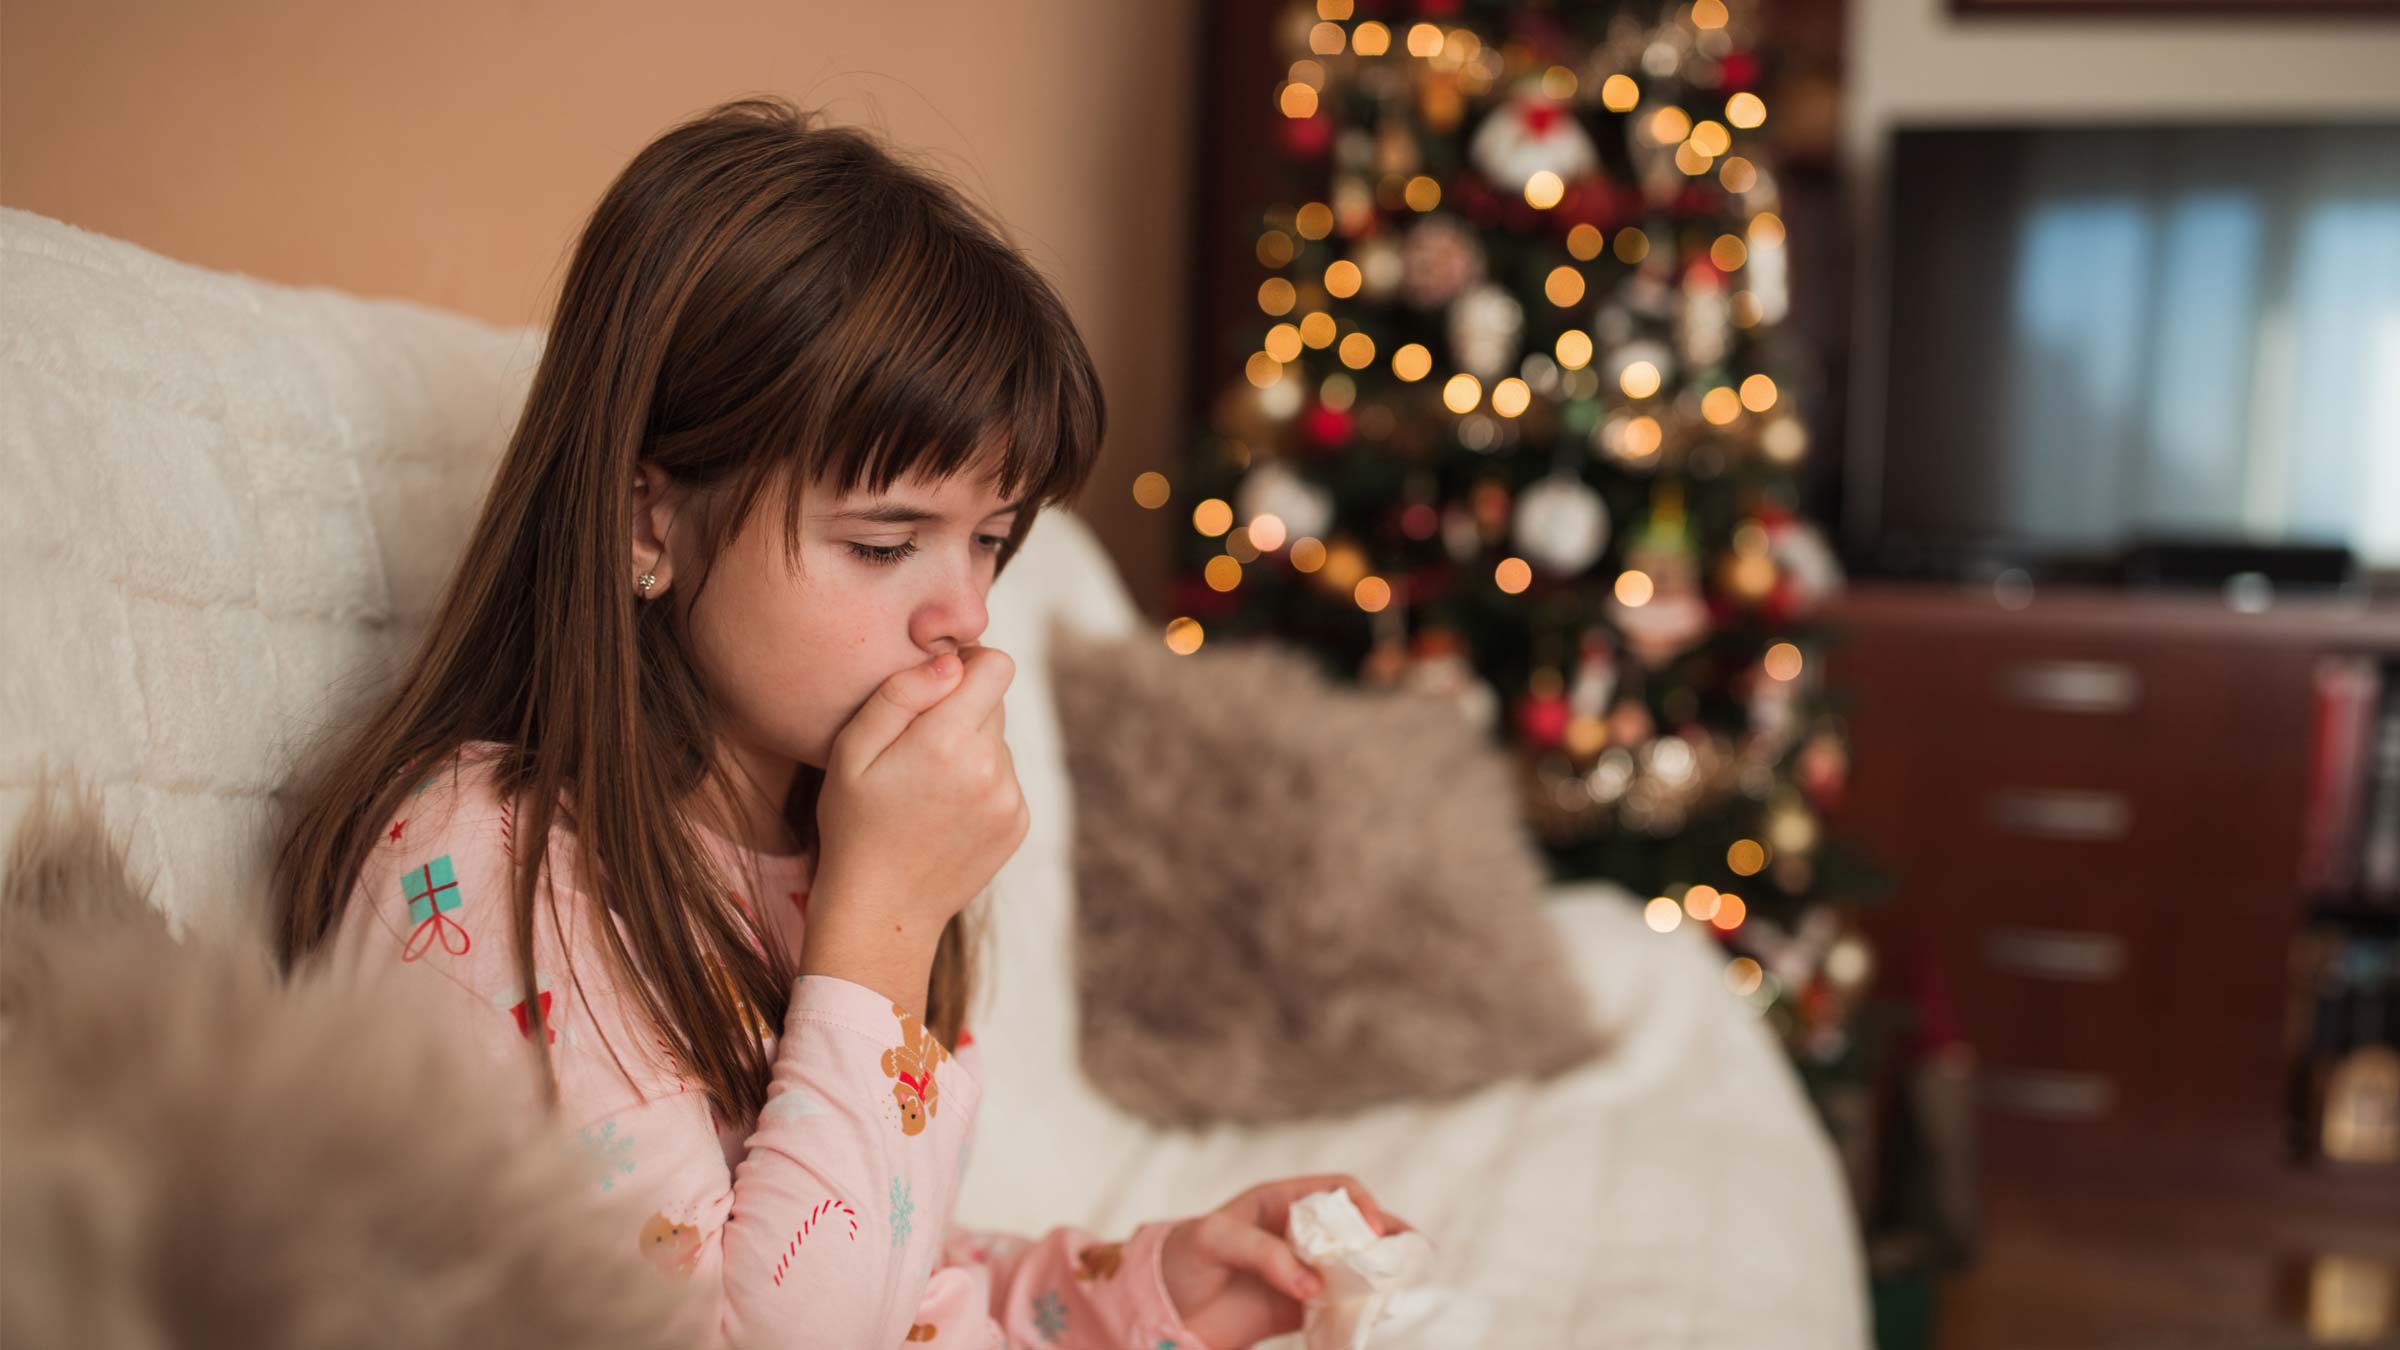 Girl sitting near Christmas tree holding hand over mouth when coughing